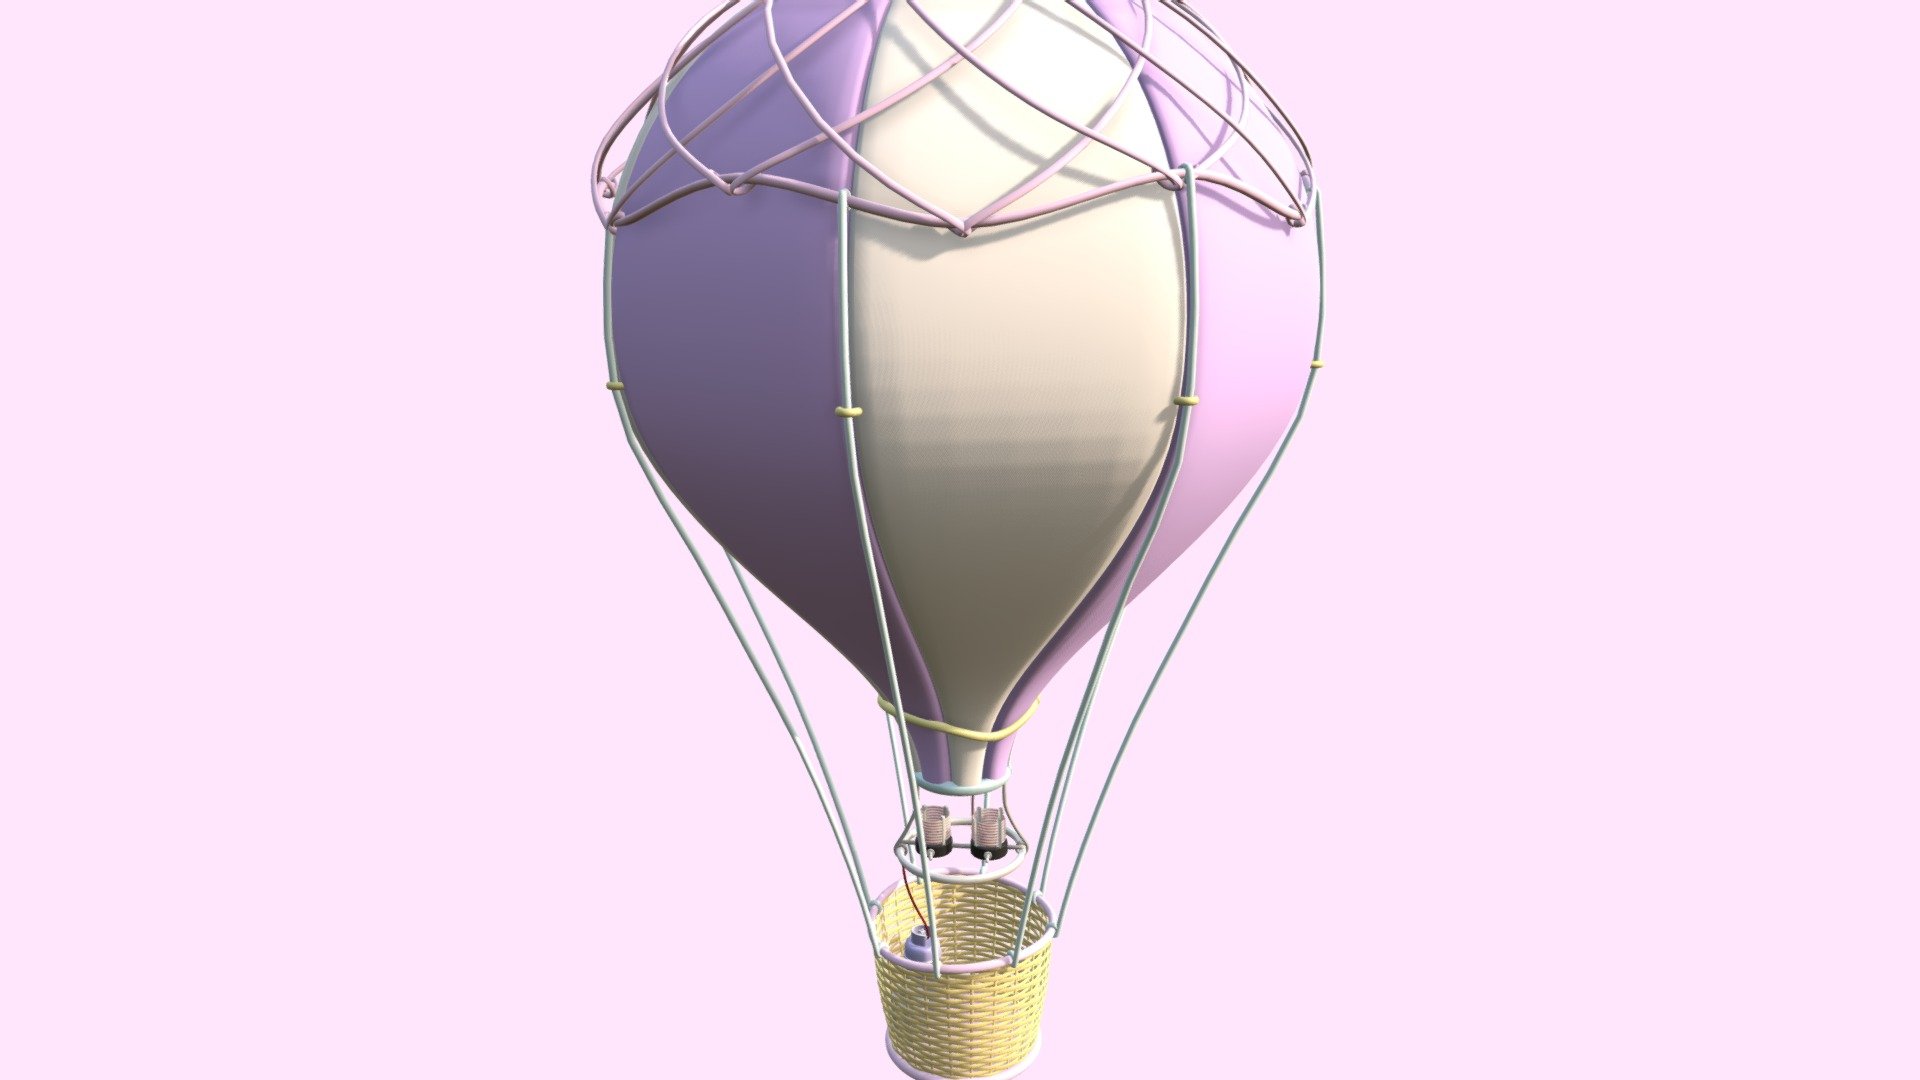 This Hot Air Balloon was made in Maya. Animations represent the parts of the balloon necessary for it to fly 3d model